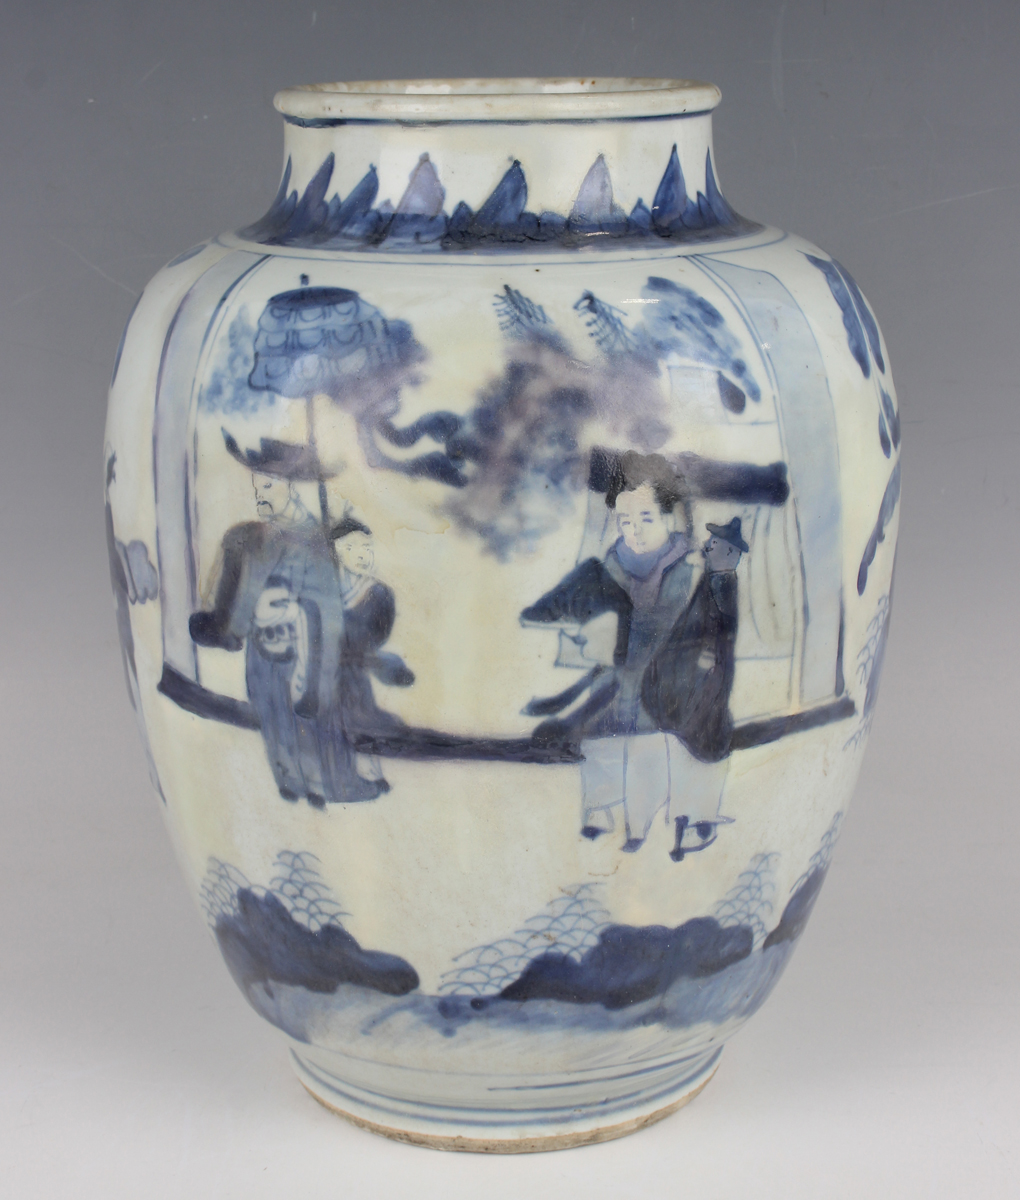 A Chinese blue and white porcelain jar, Transitional period, mid-17th century, of shouldered ovoid